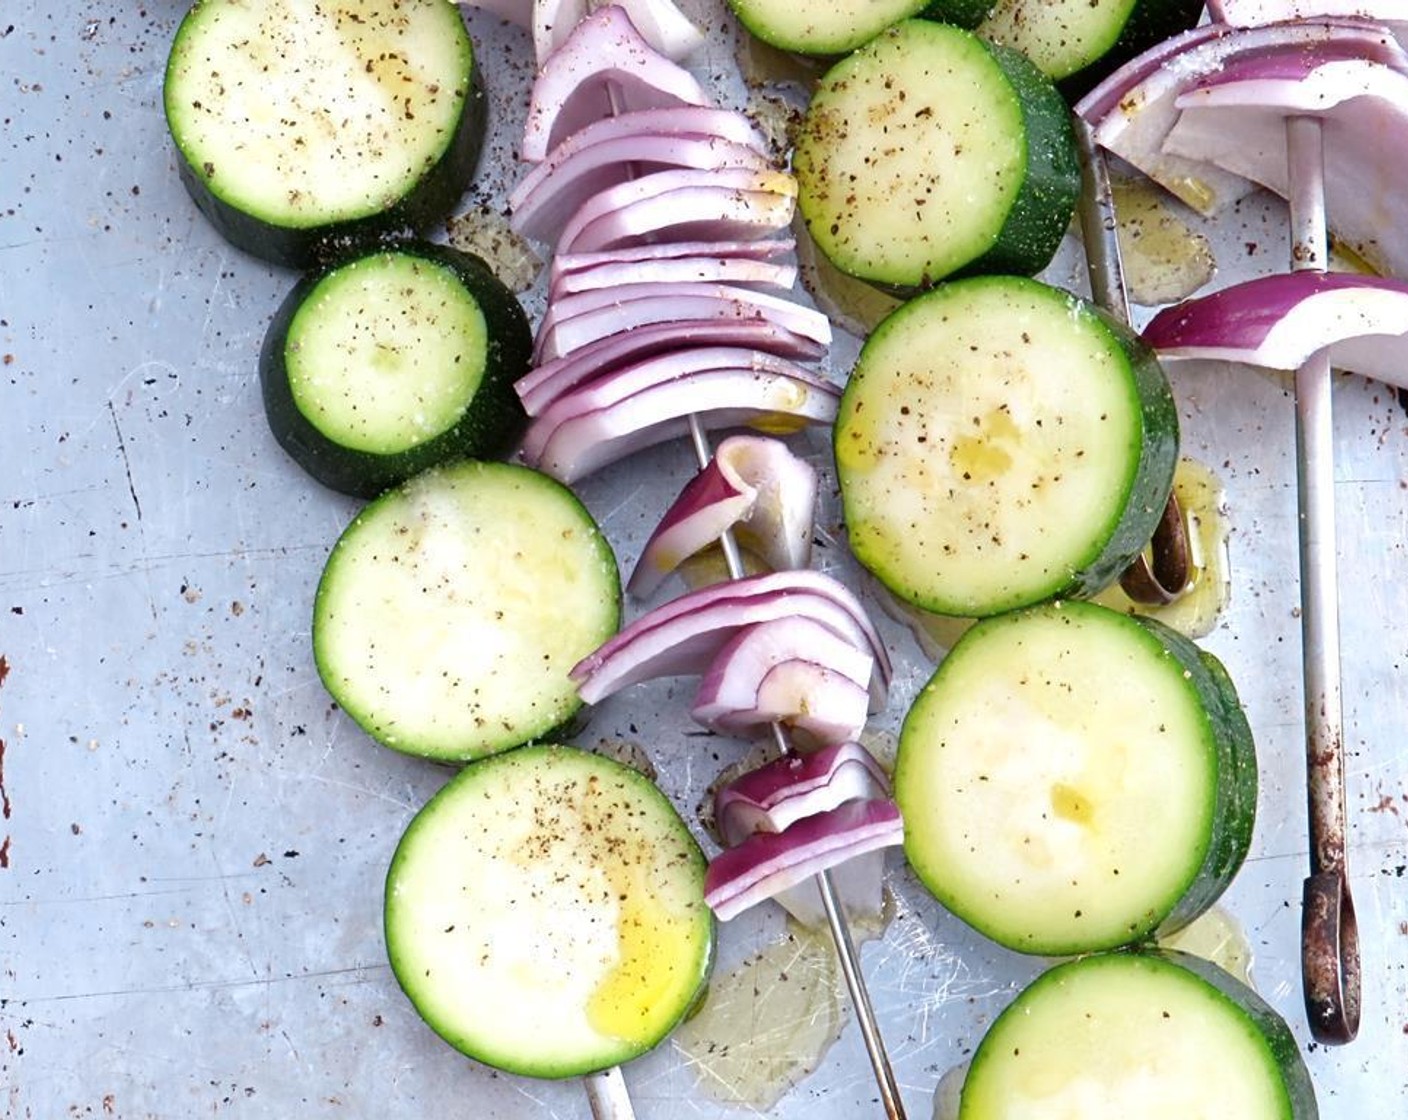 step 7 If grilling, skewer the zucchini slices (skewer on the thin side, so that more of the flesh can get the char of the grill). Separate the layers of onion and loosely skewer.